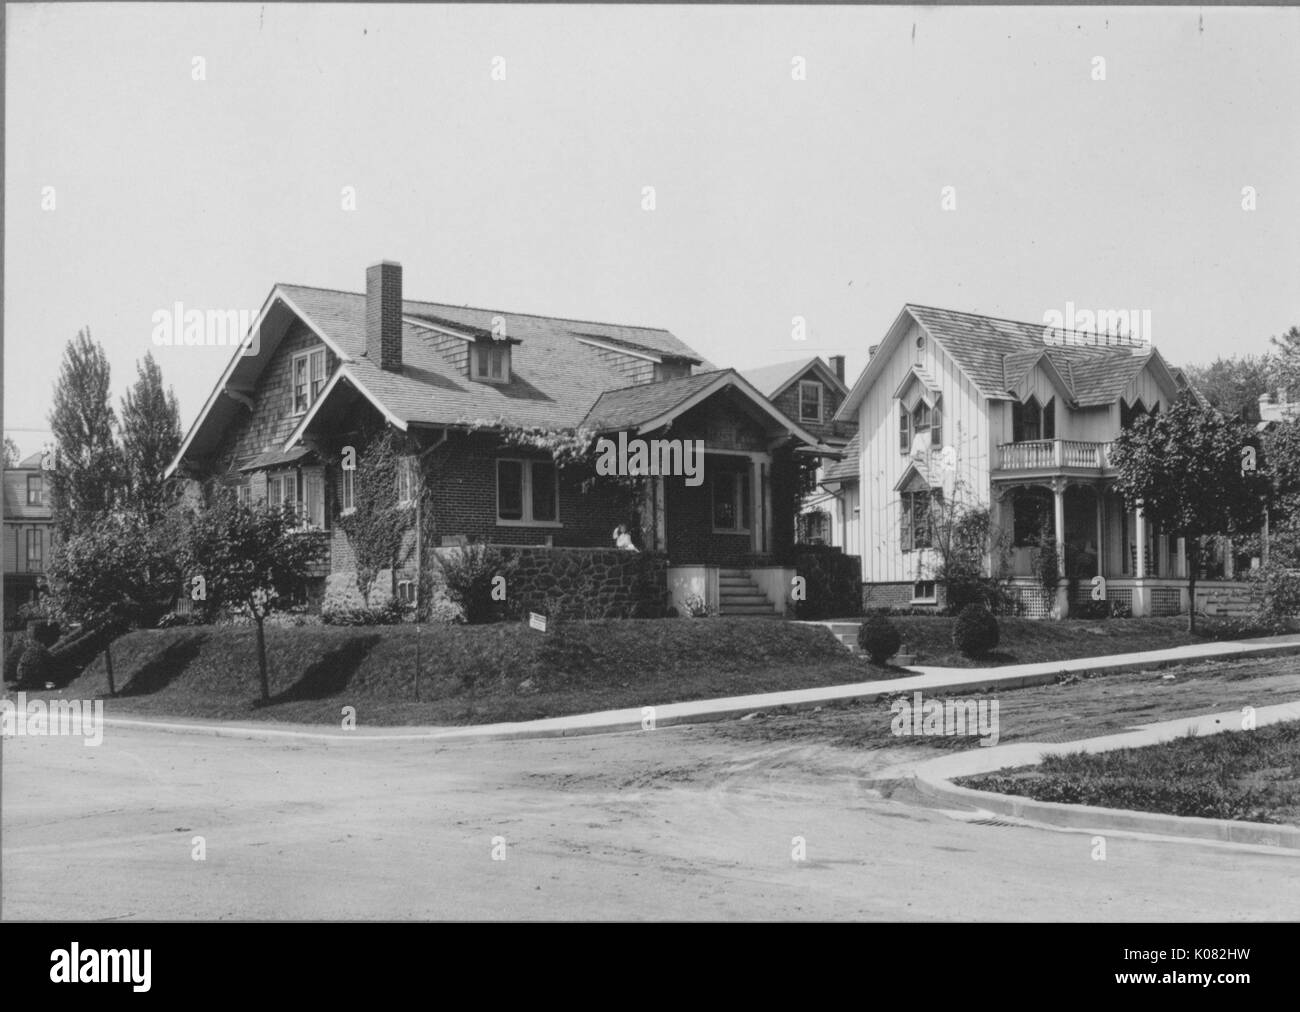 Angled side view of two homes on quiet street, one house made of dark-colored stone and brick with chimney and plants surrounding house and vines alongside wall, another house with light-colored panels, porch and columns, street and sidewalks running alongside homes, trees lining sidewalks, houses on slight hill, Baltimore, Maryland, 1910. This image is from a series documenting the construction and sale of homes in the Roland Park/Guilford neighborhood of Baltimore, a streetcar suburb and one of the first planned communities in the United States. Stock Photo